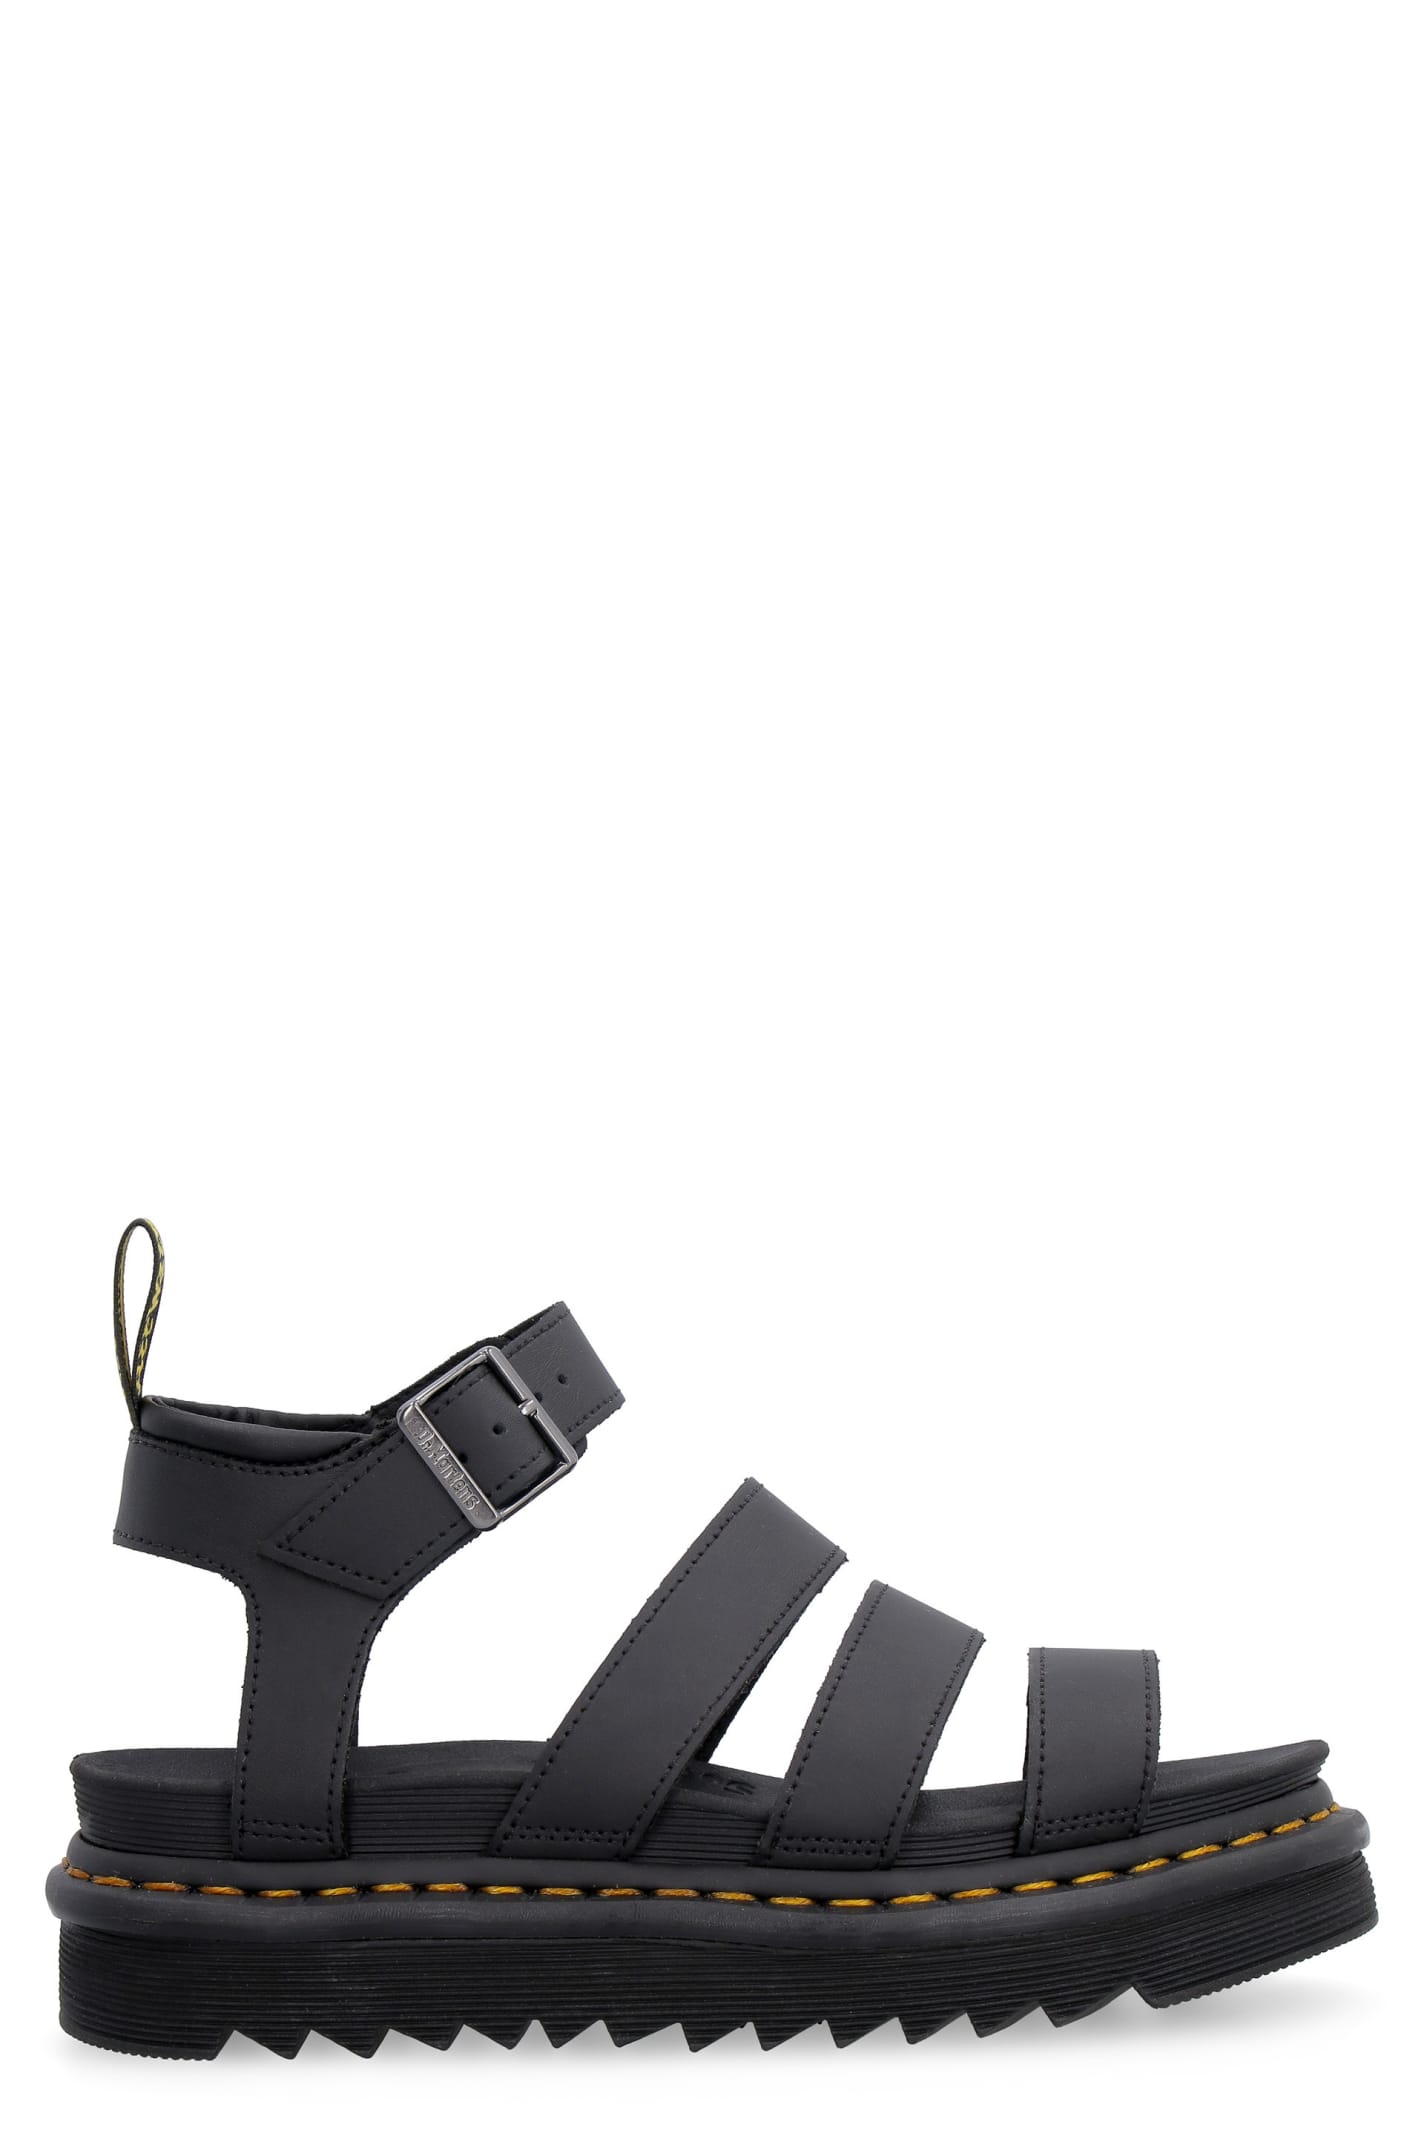 Buy Dr. Martens Blaire Leather Sandals online, shop Dr. Martens shoes with free shipping